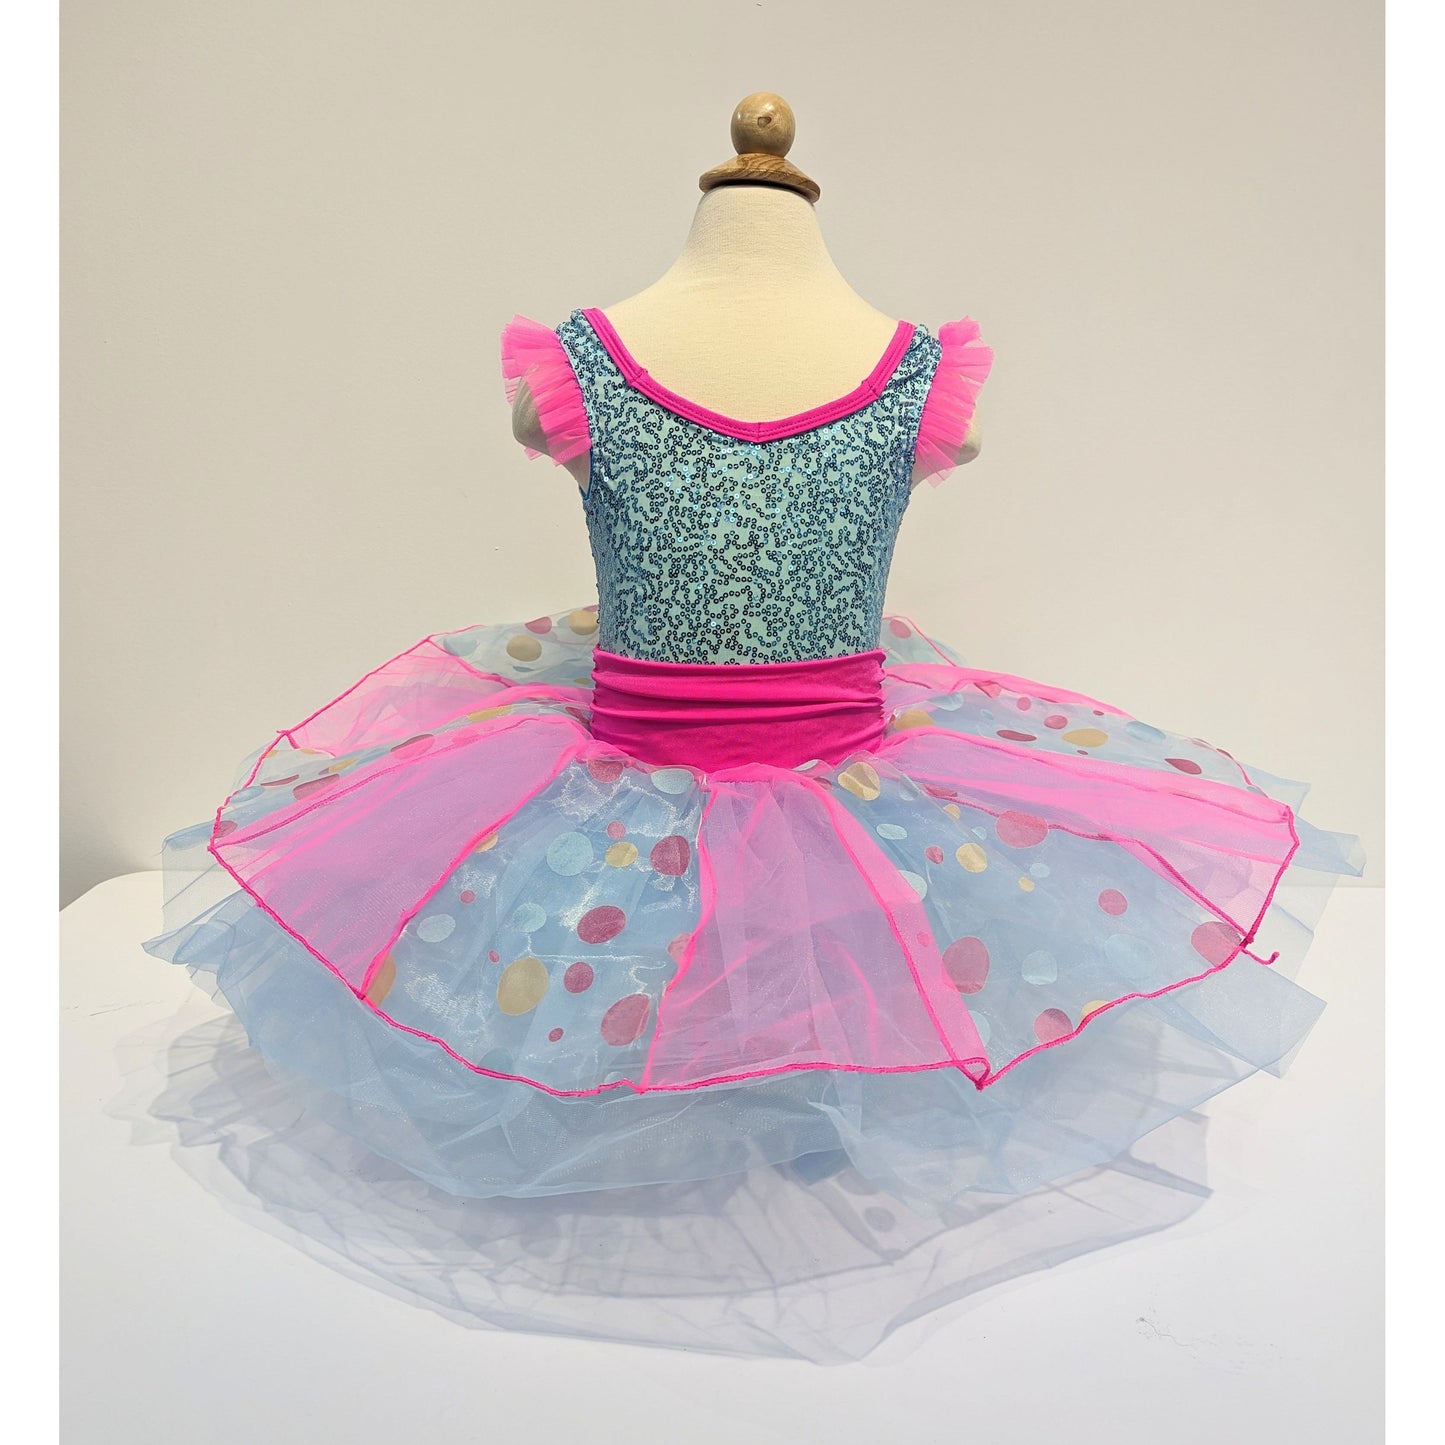 Childs Blue and Pink Ballet Dress